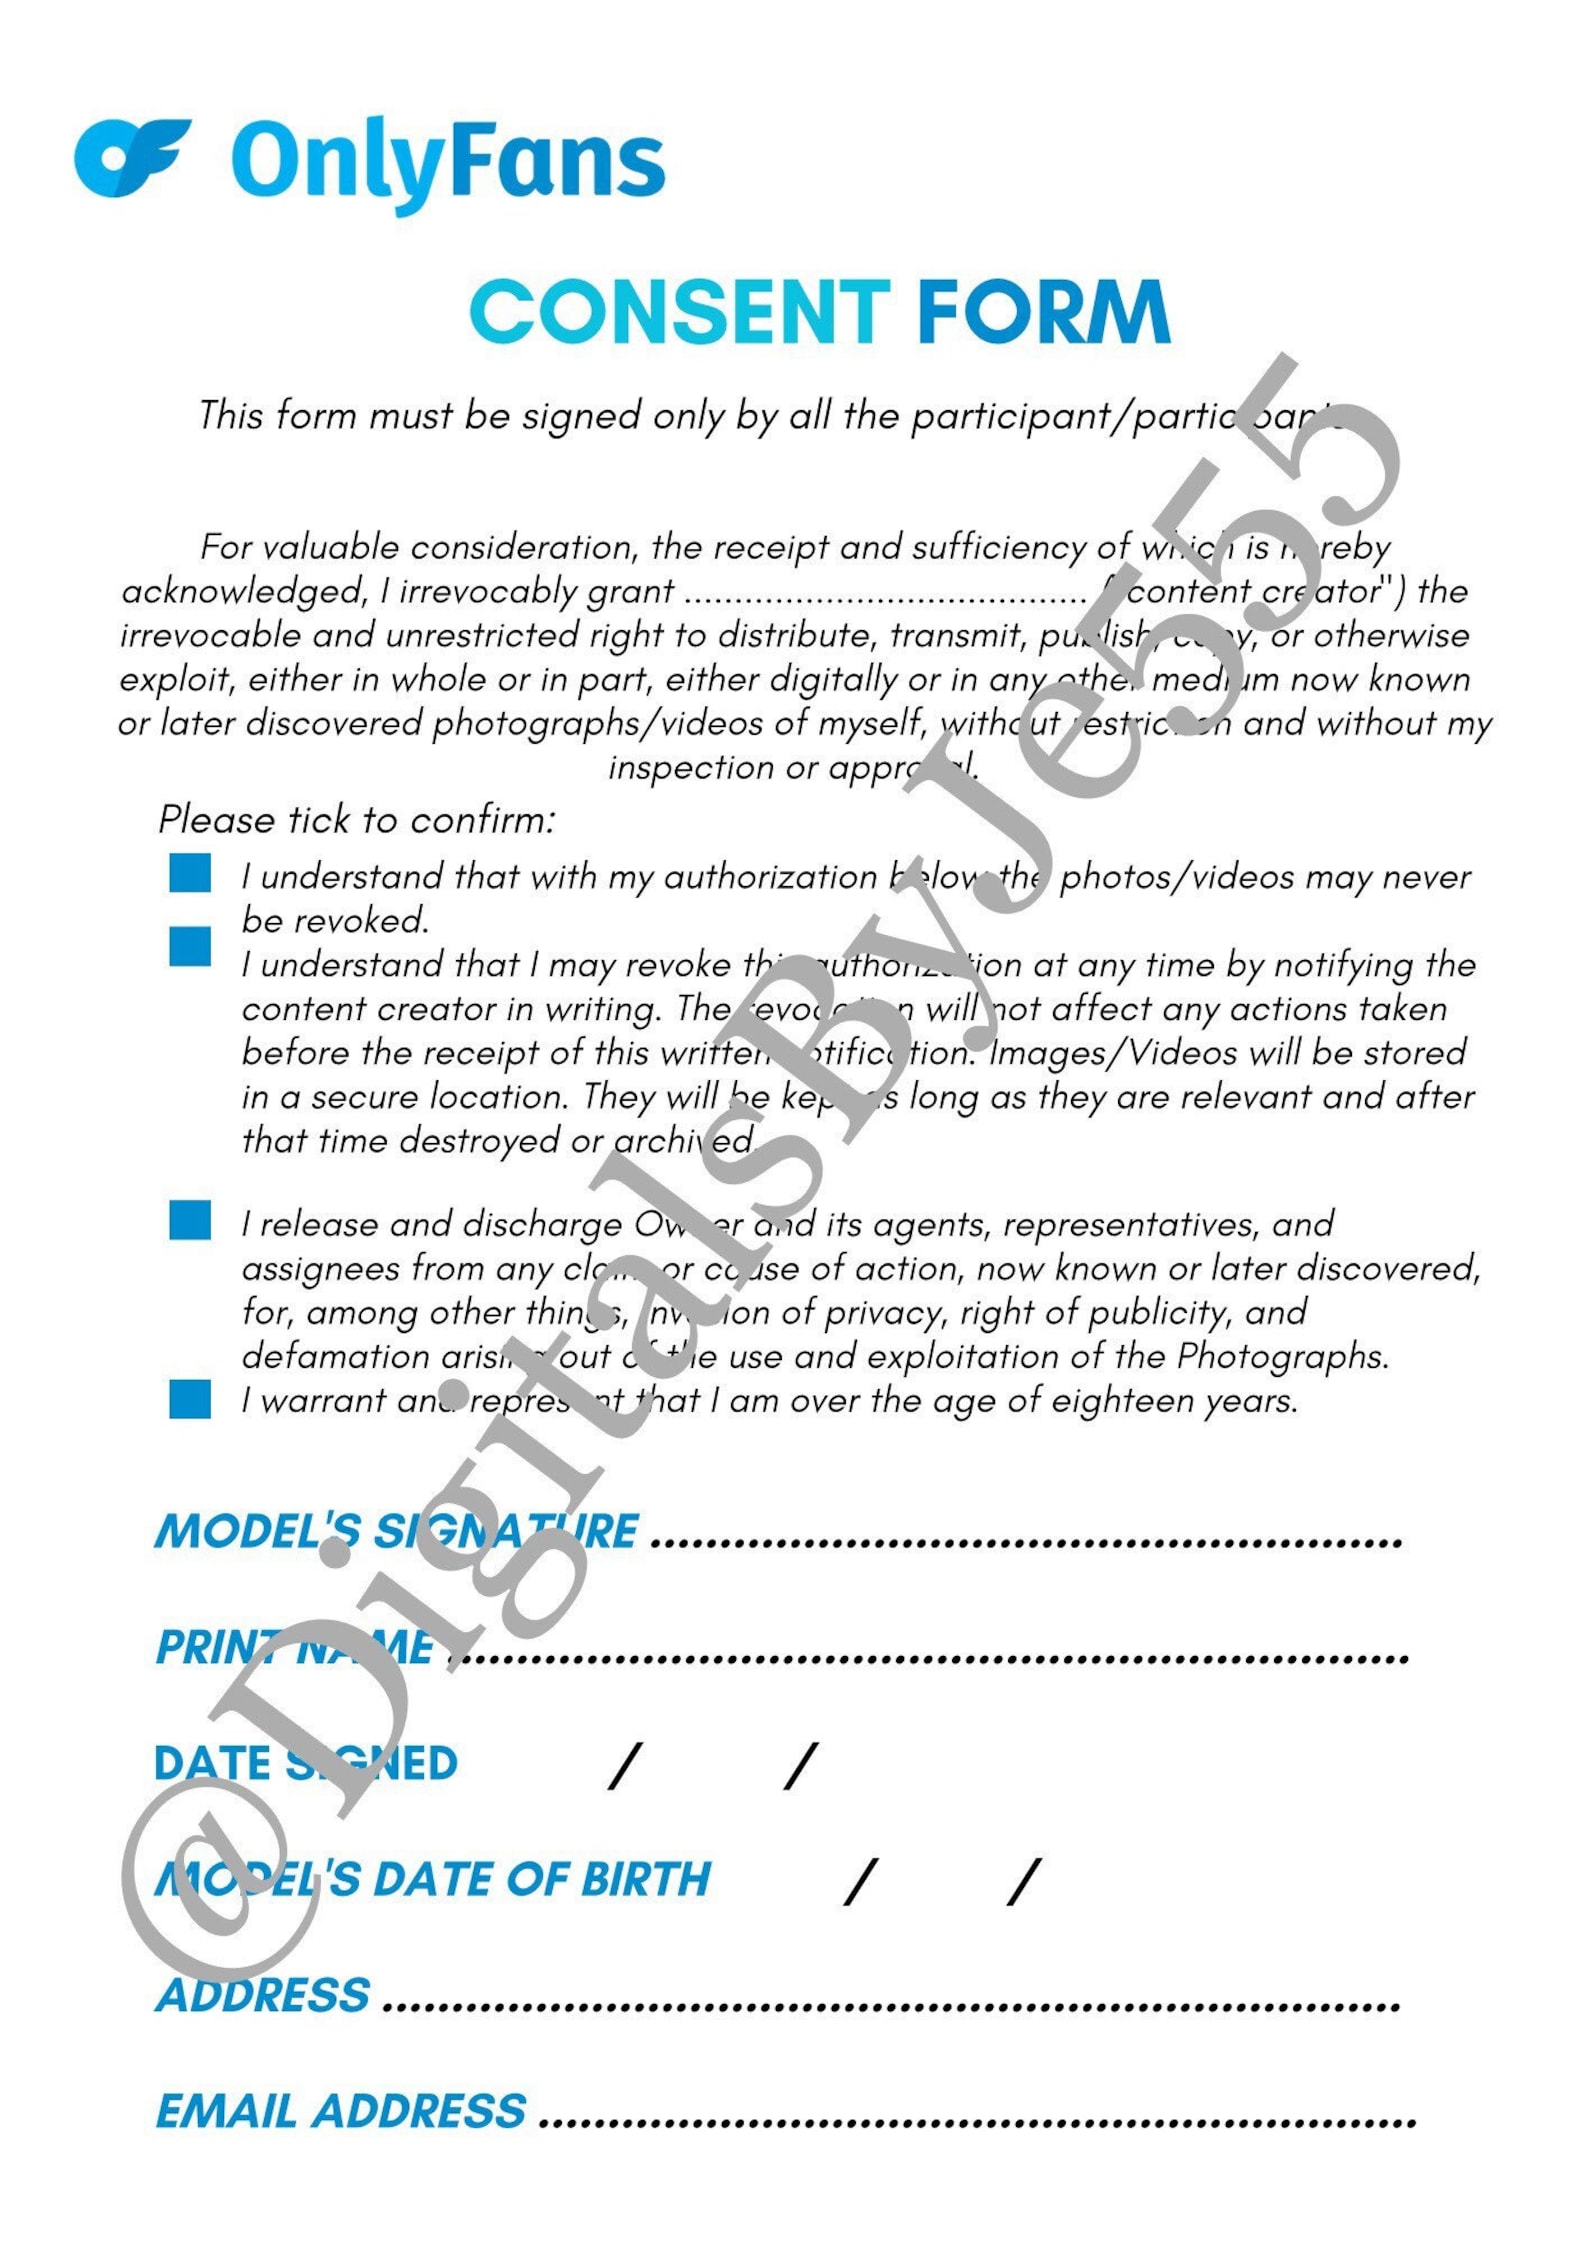 onlyfans-consent-form-digital-download-template-etsy-hong-kong